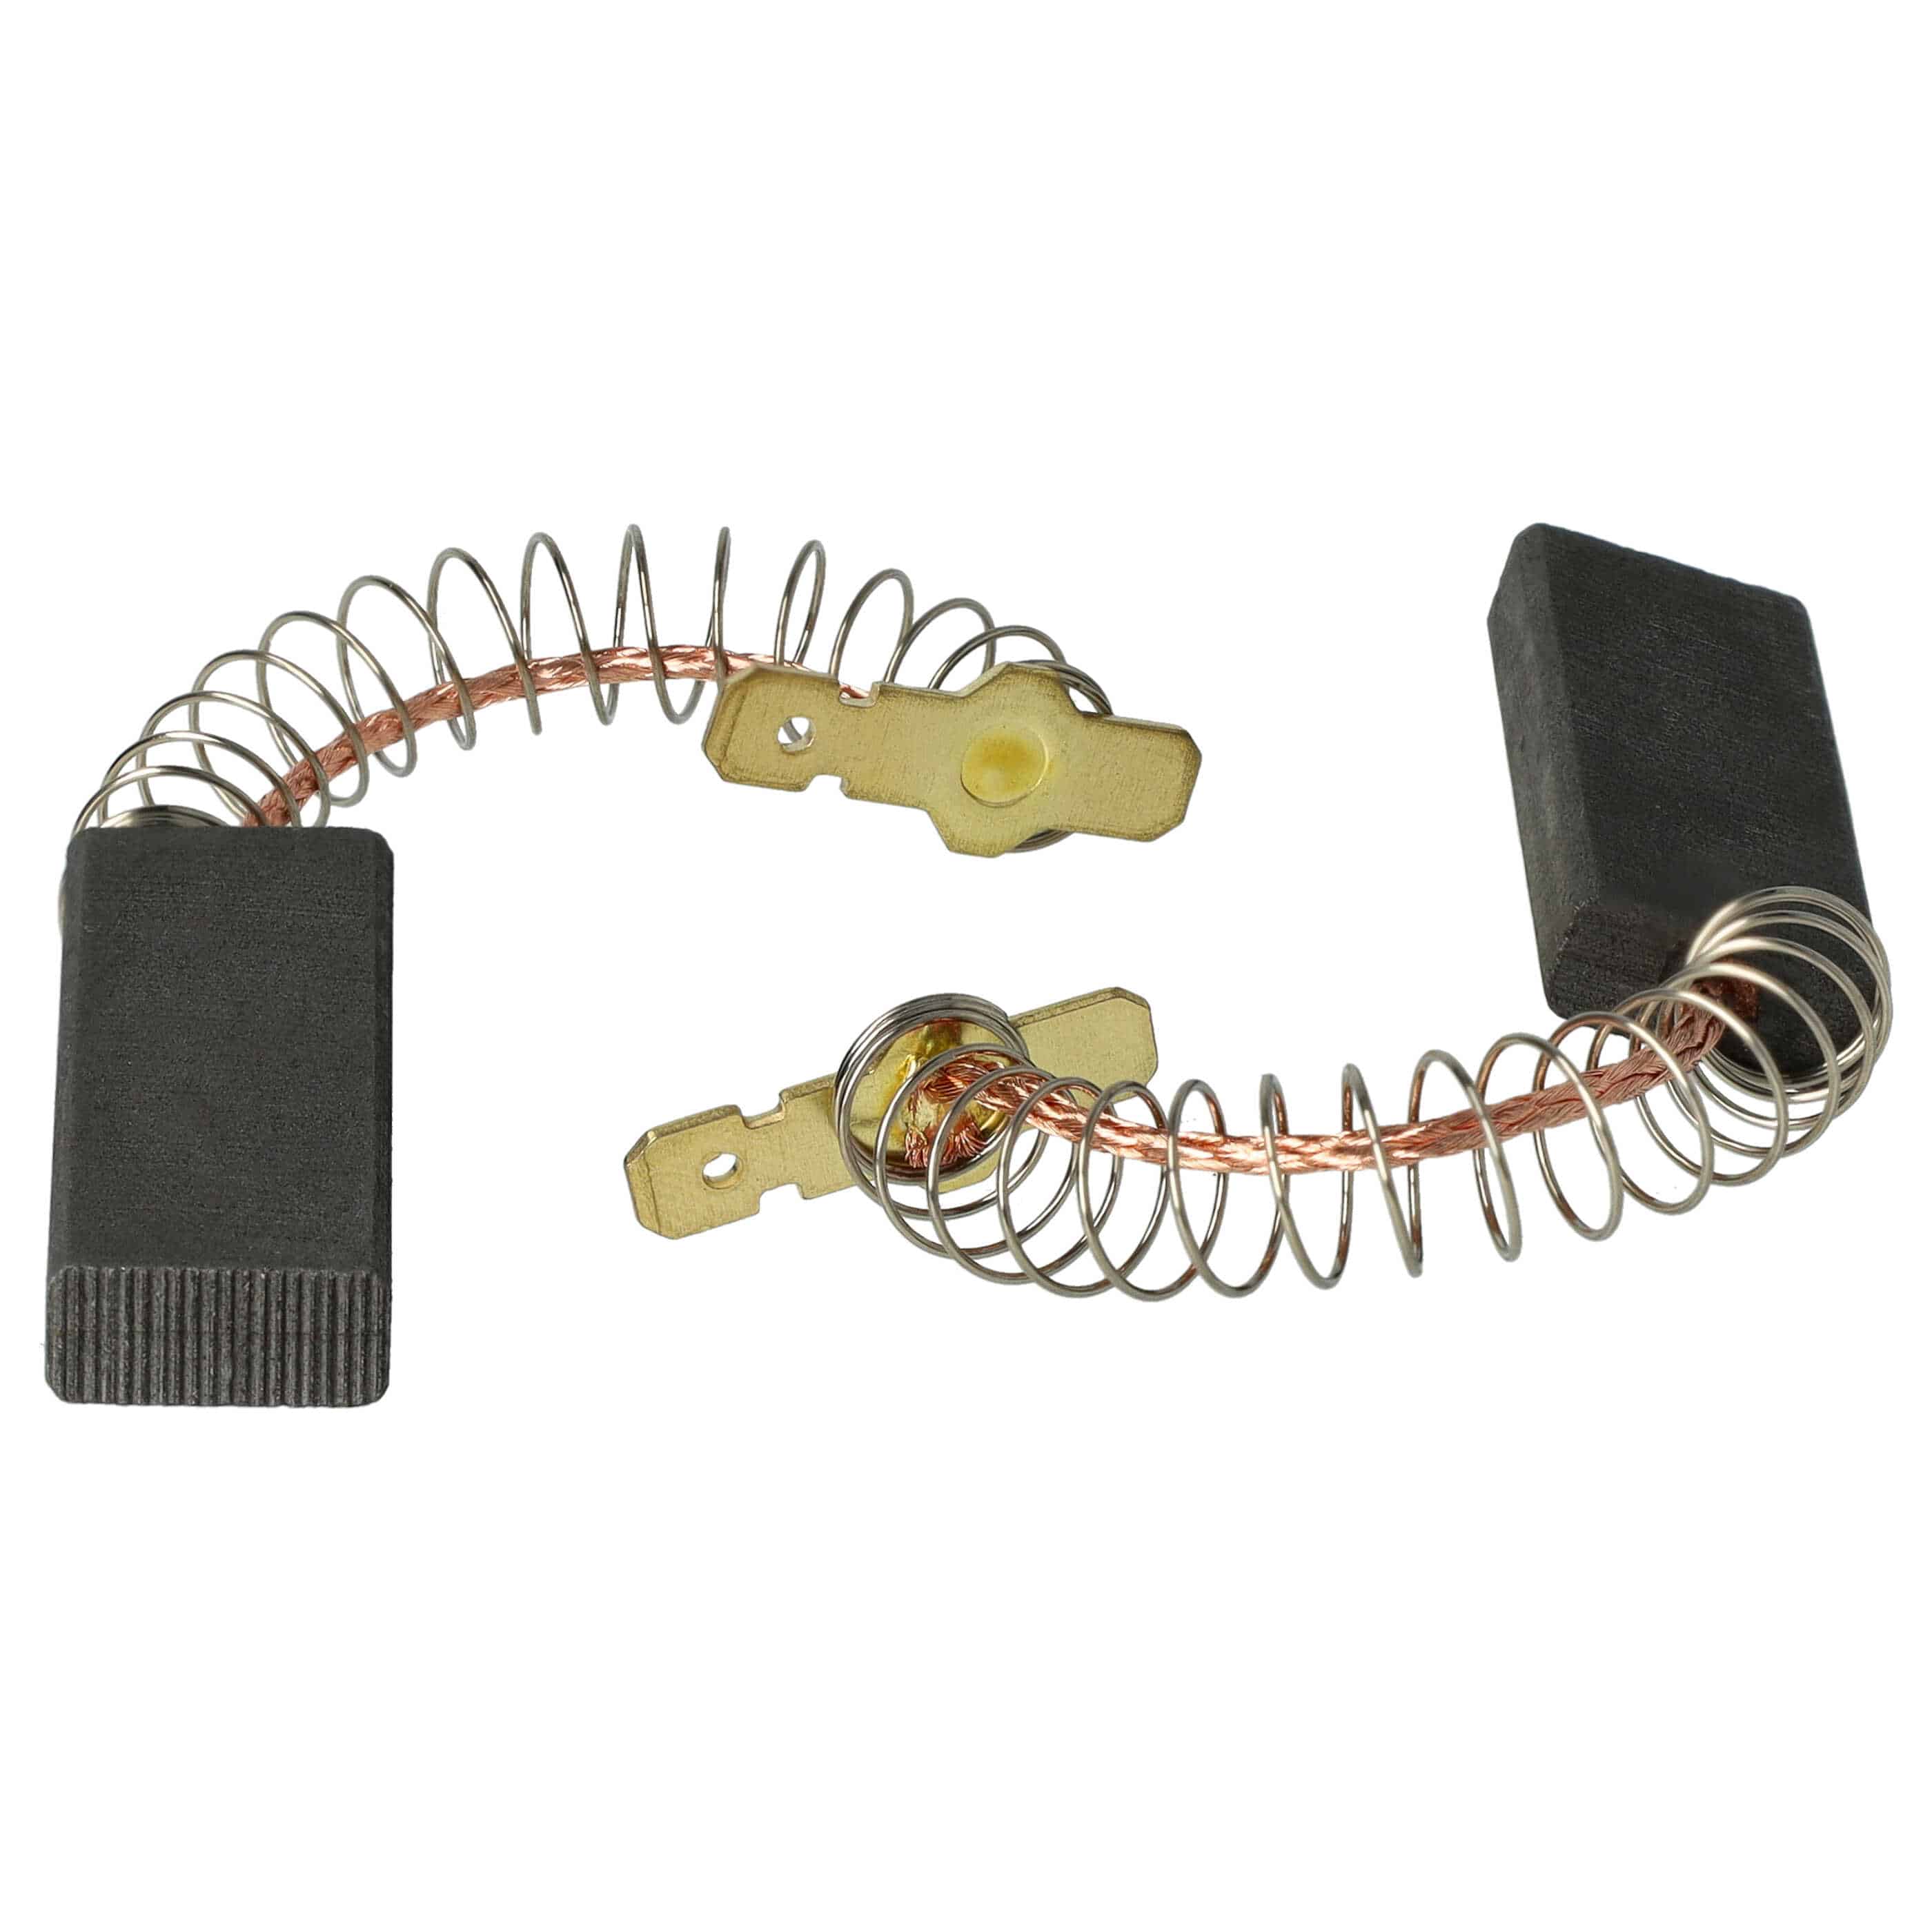 2x Carbon Brush as Replacement for Bosch 154740 Electric Power Tools + Spring + Connector, 5 x 12 x 33mm